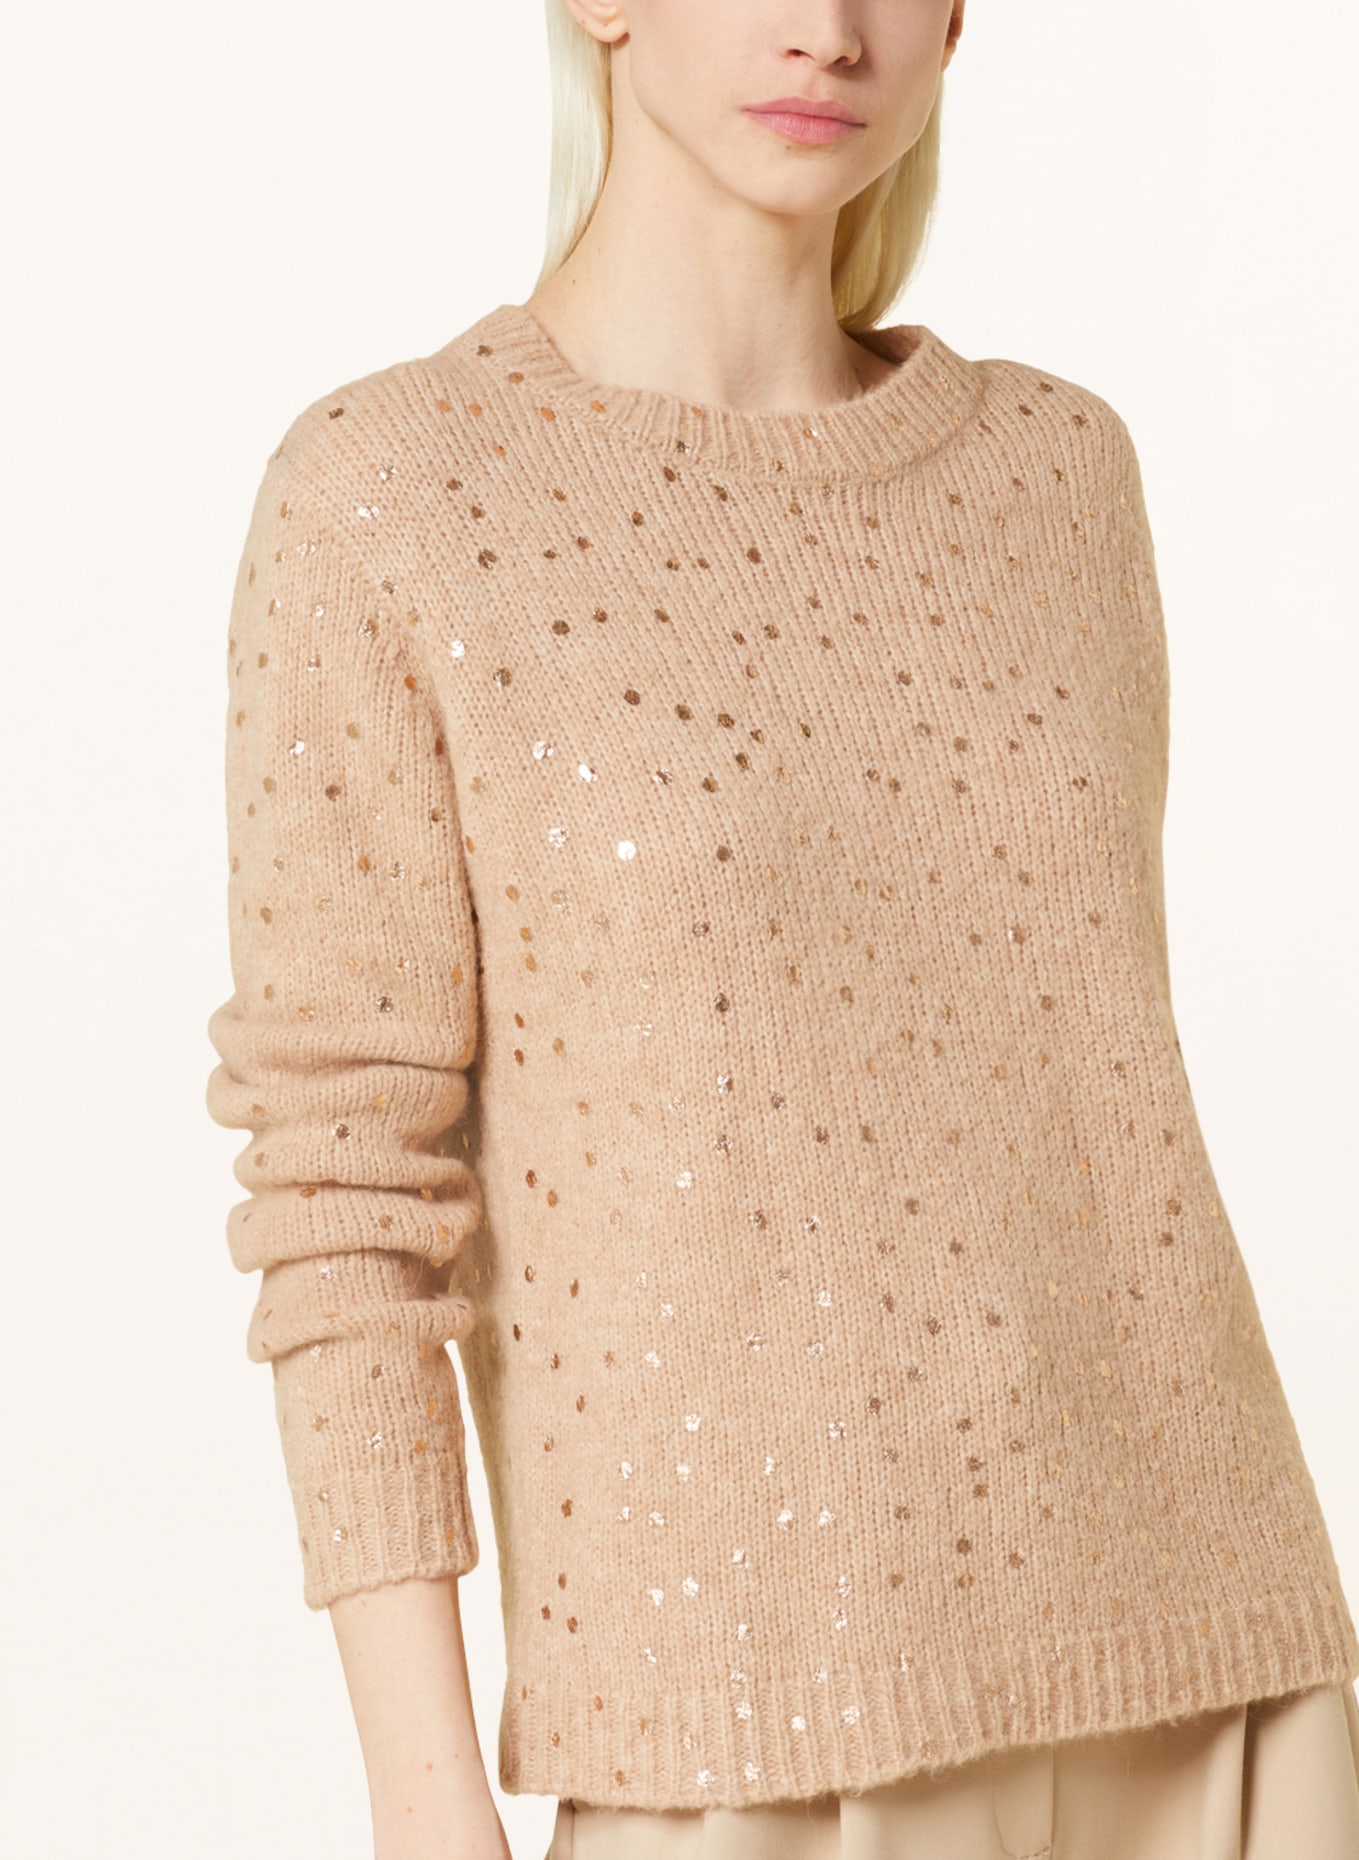 Princess GOES HOLLYWOOD Sweater, Color: CAMEL (Image 4)